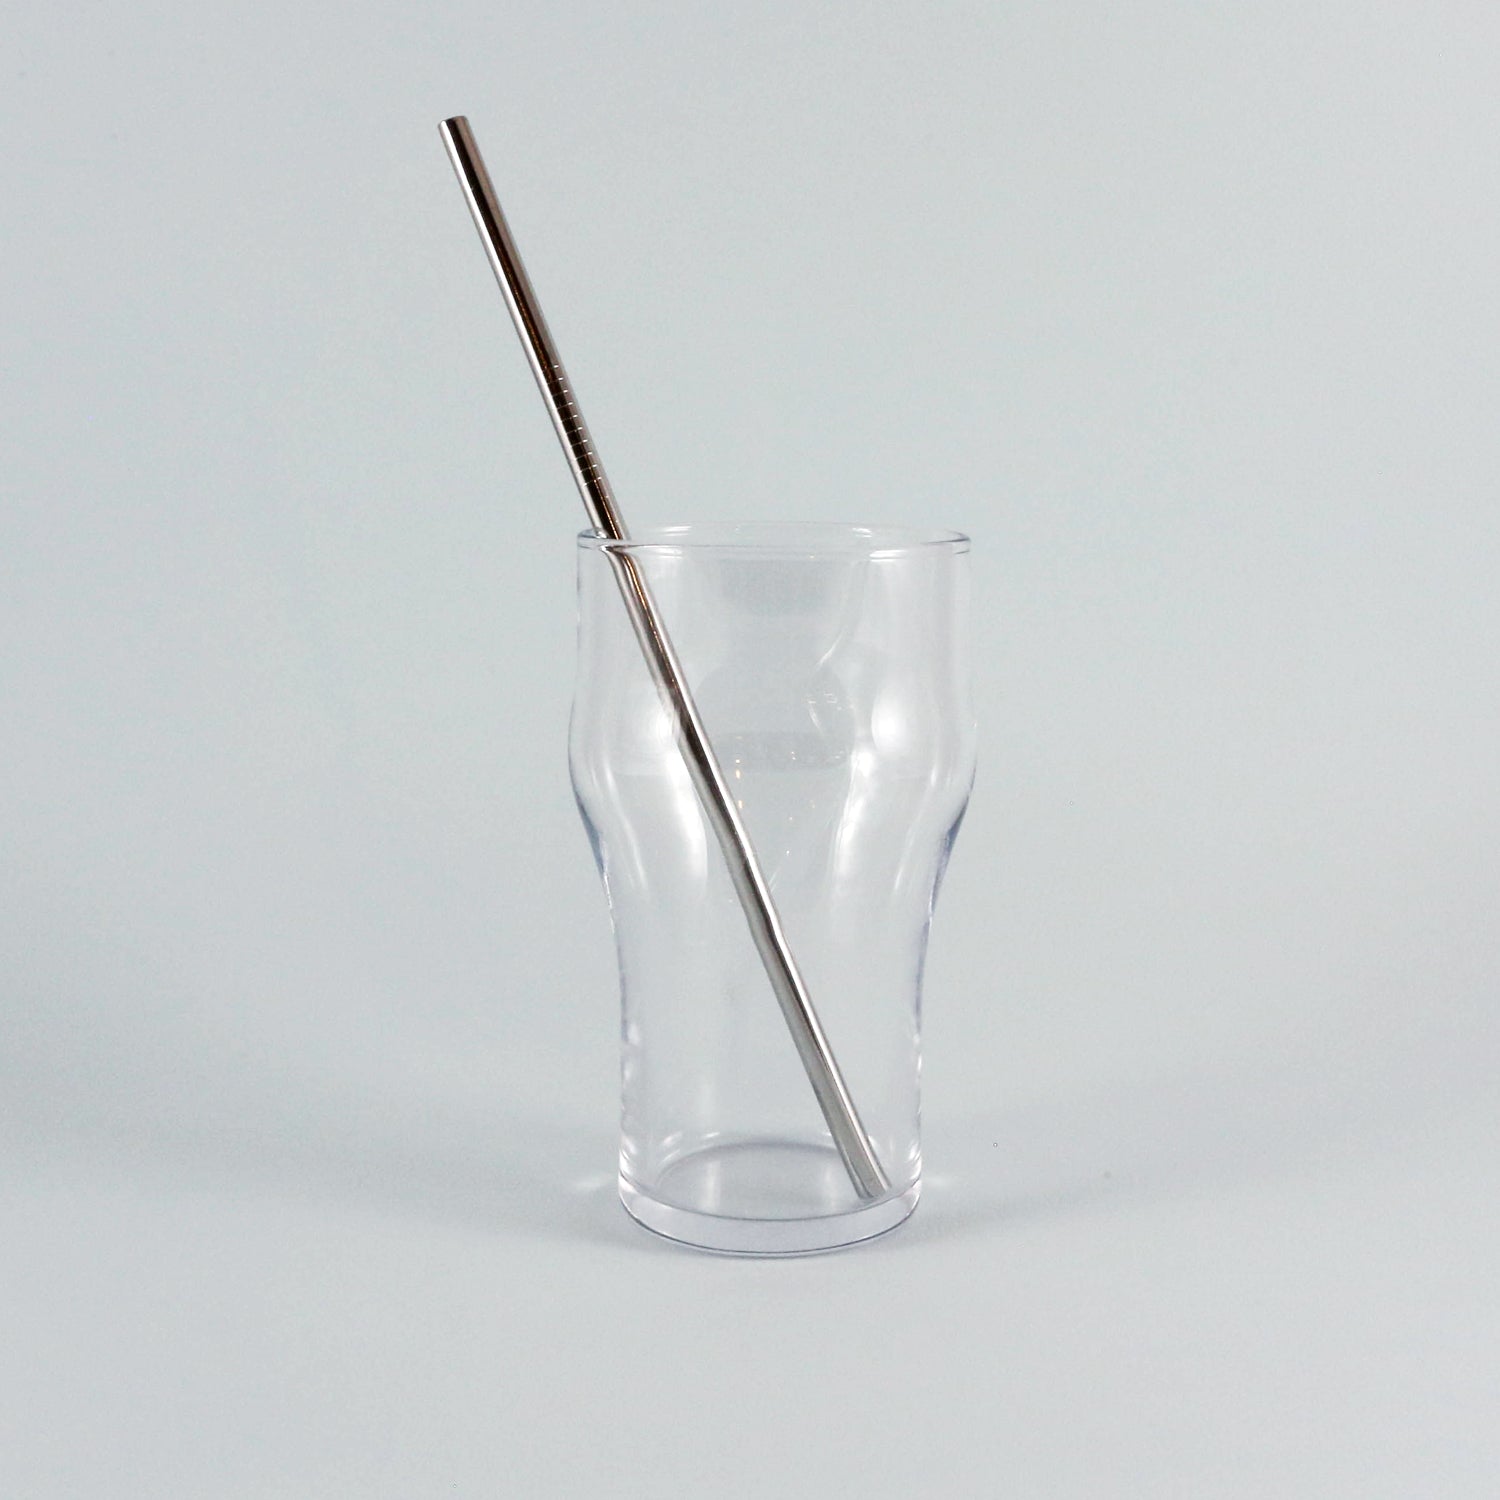 A stylish Tandem Straw from Tandem Coffee Roasters rests diagonally in an empty, clear, irregularly-shaped glass against a plain light gray background.